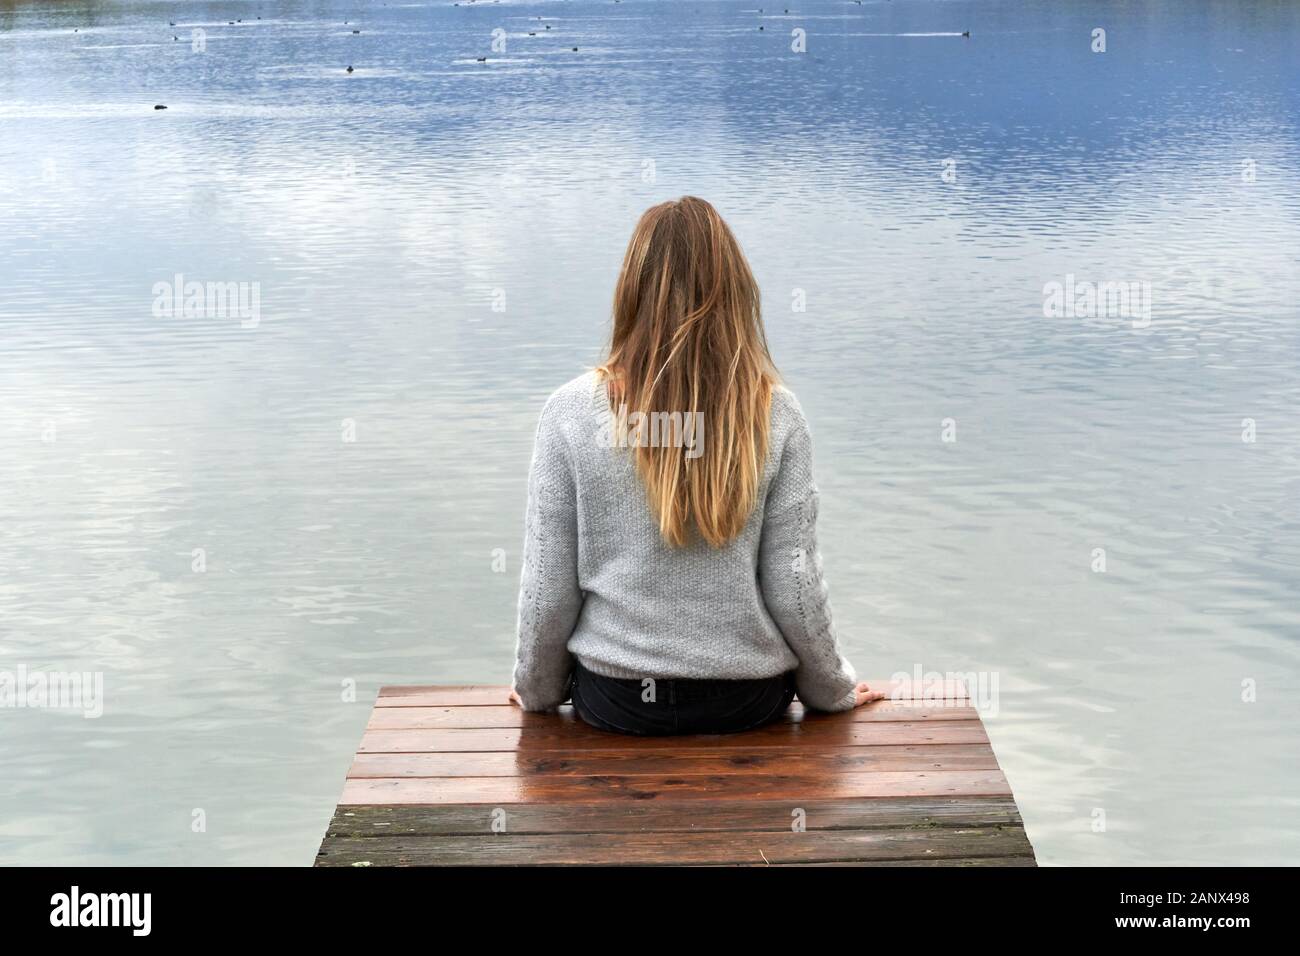 Young blond girl with long hair, sit down and back to the camera on a wooden pier in front of a calm lake looking to the horizon in Baviera. Travel co Stock Photo